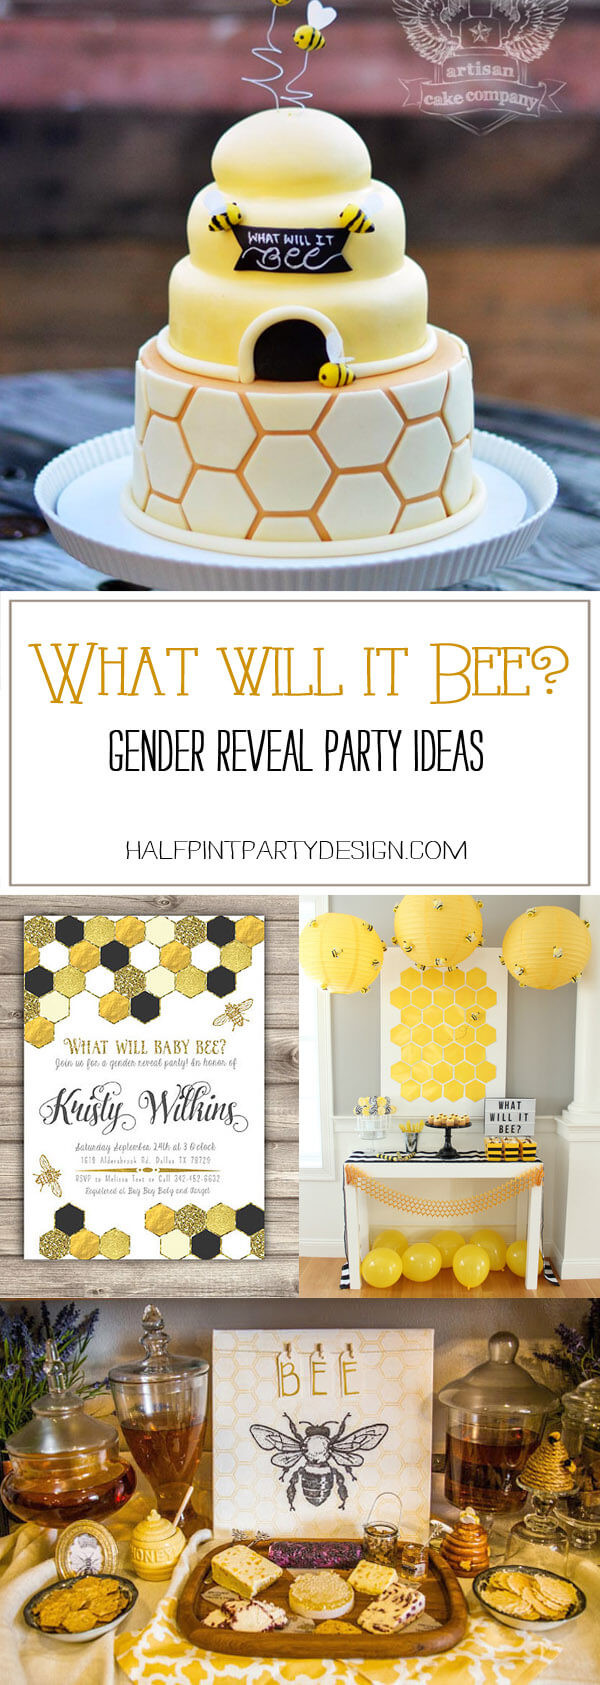 Gender Reveal Party Ideas Blog
 What Will it Bee Gender Reveal Party Ideas Parties With